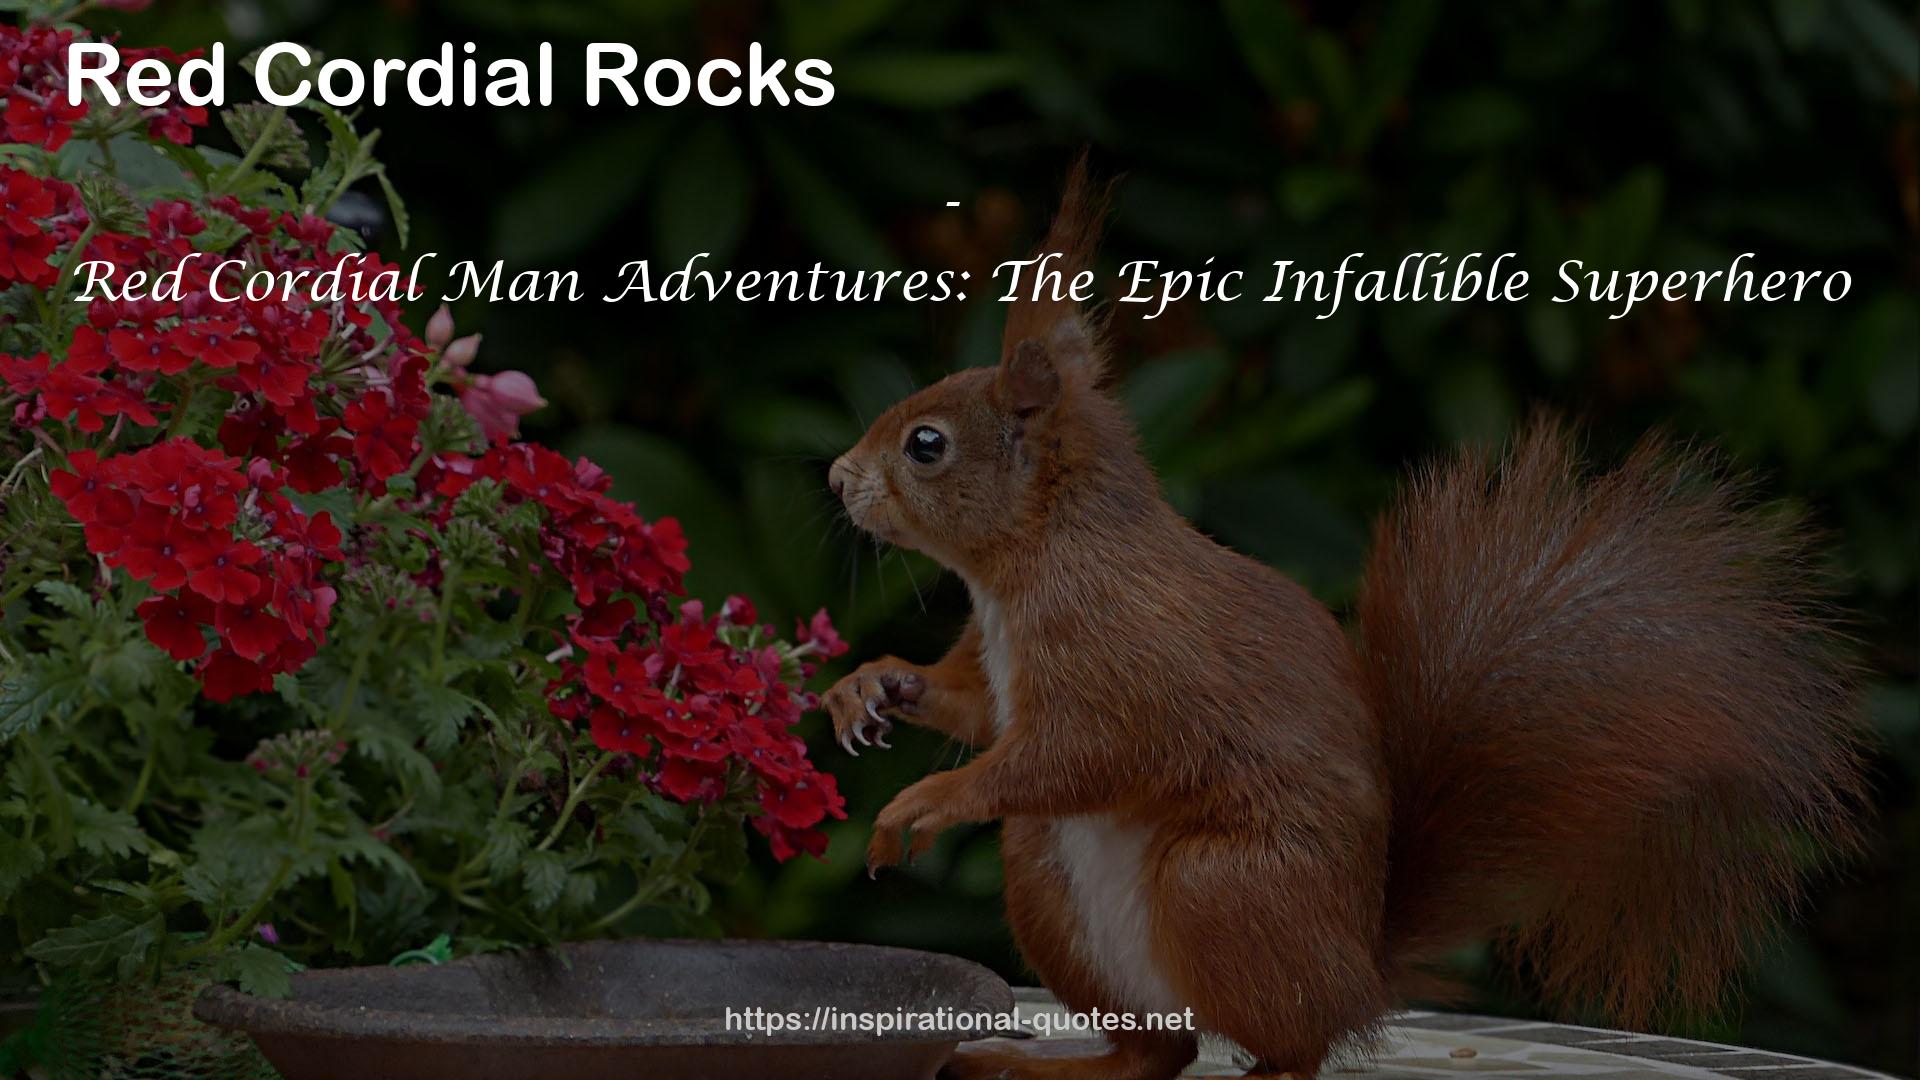 Red Cordial Man Adventures: The Epic Infallible Superhero QUOTES